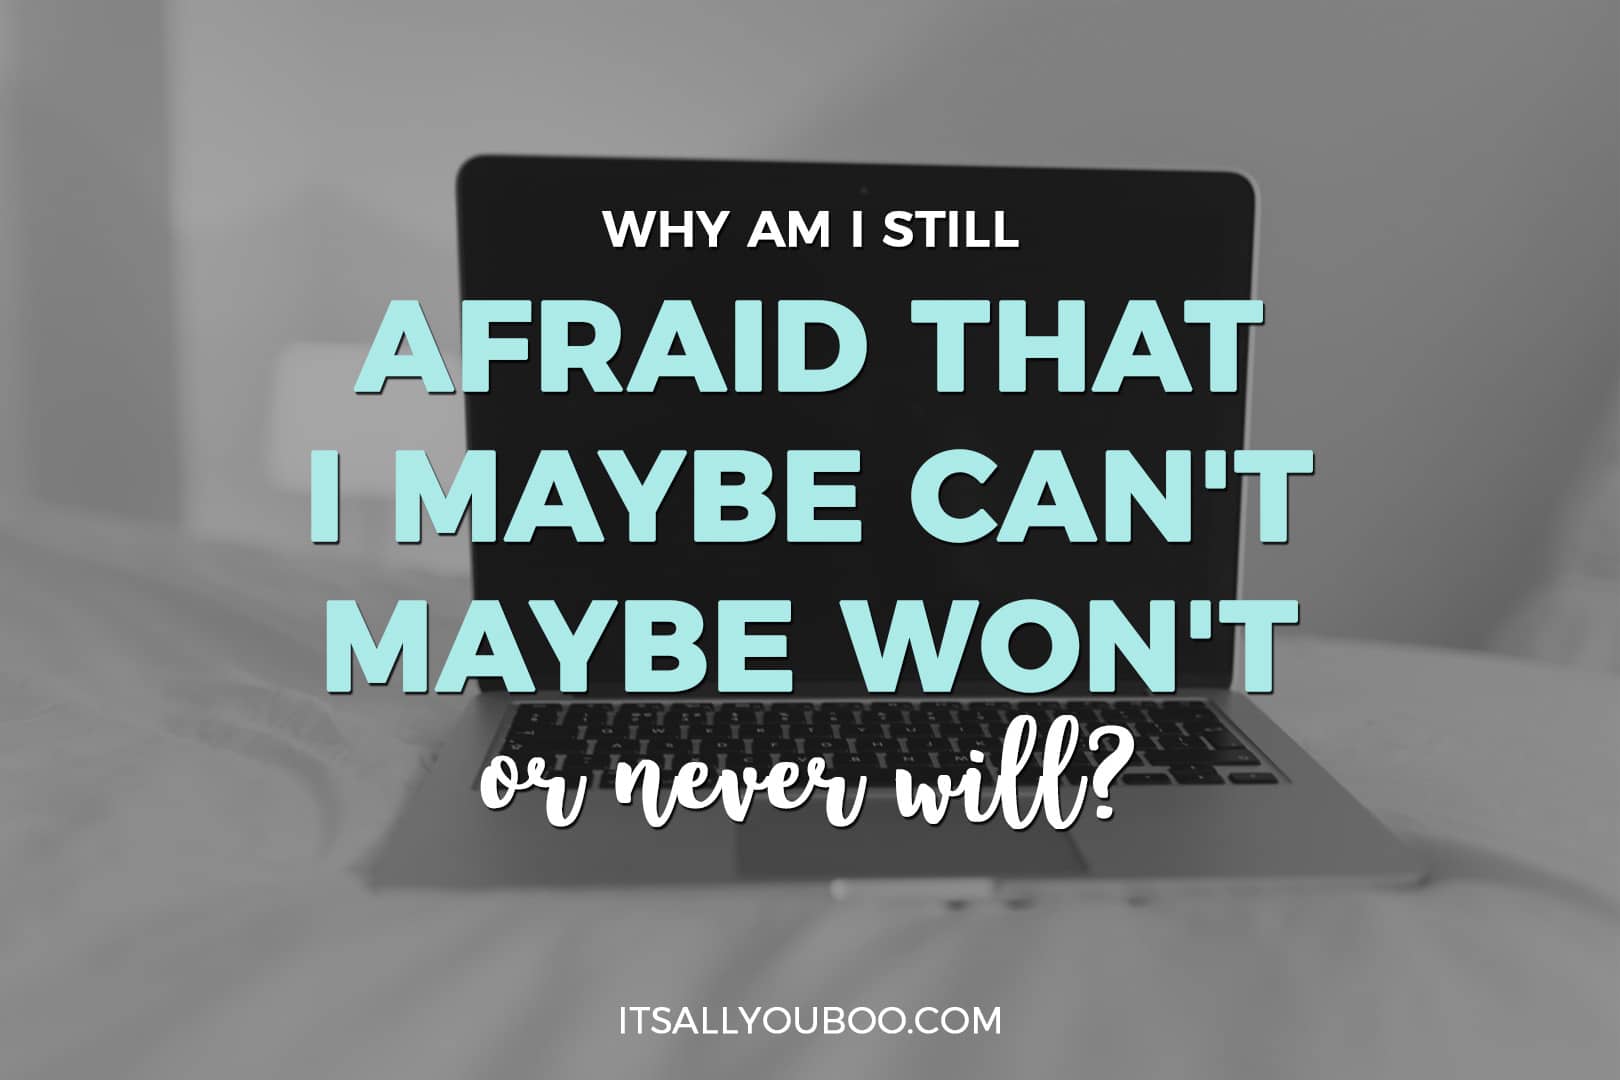 laptop open with a blank screen with "why am I still afraid that I maybe can't, maybe won't or never will?" written